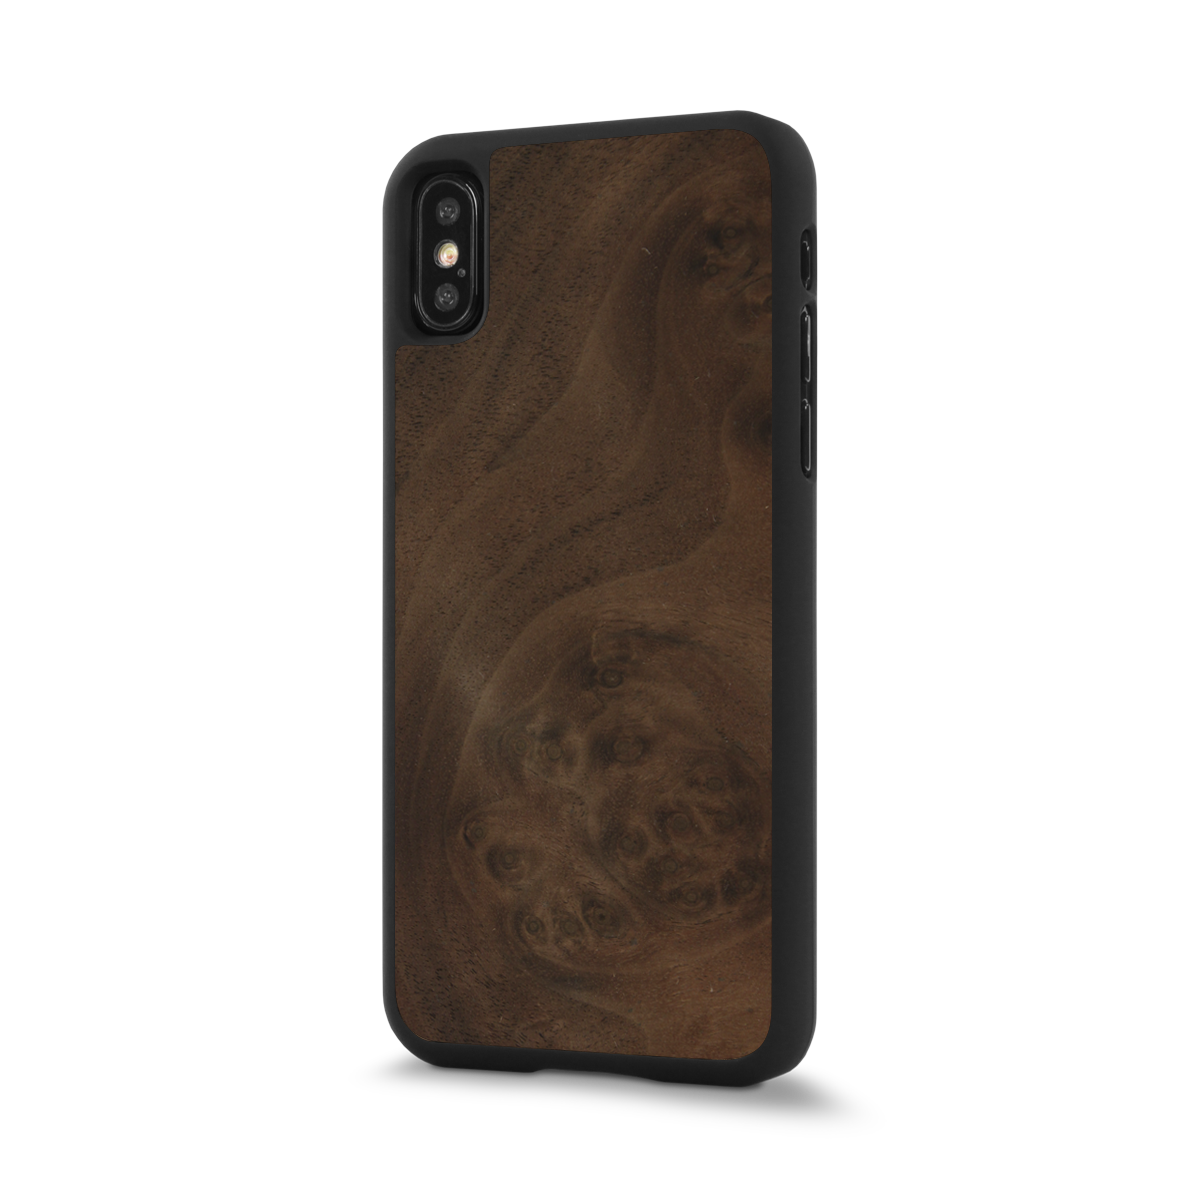 iPhone XS —  #WoodBack Snap Case